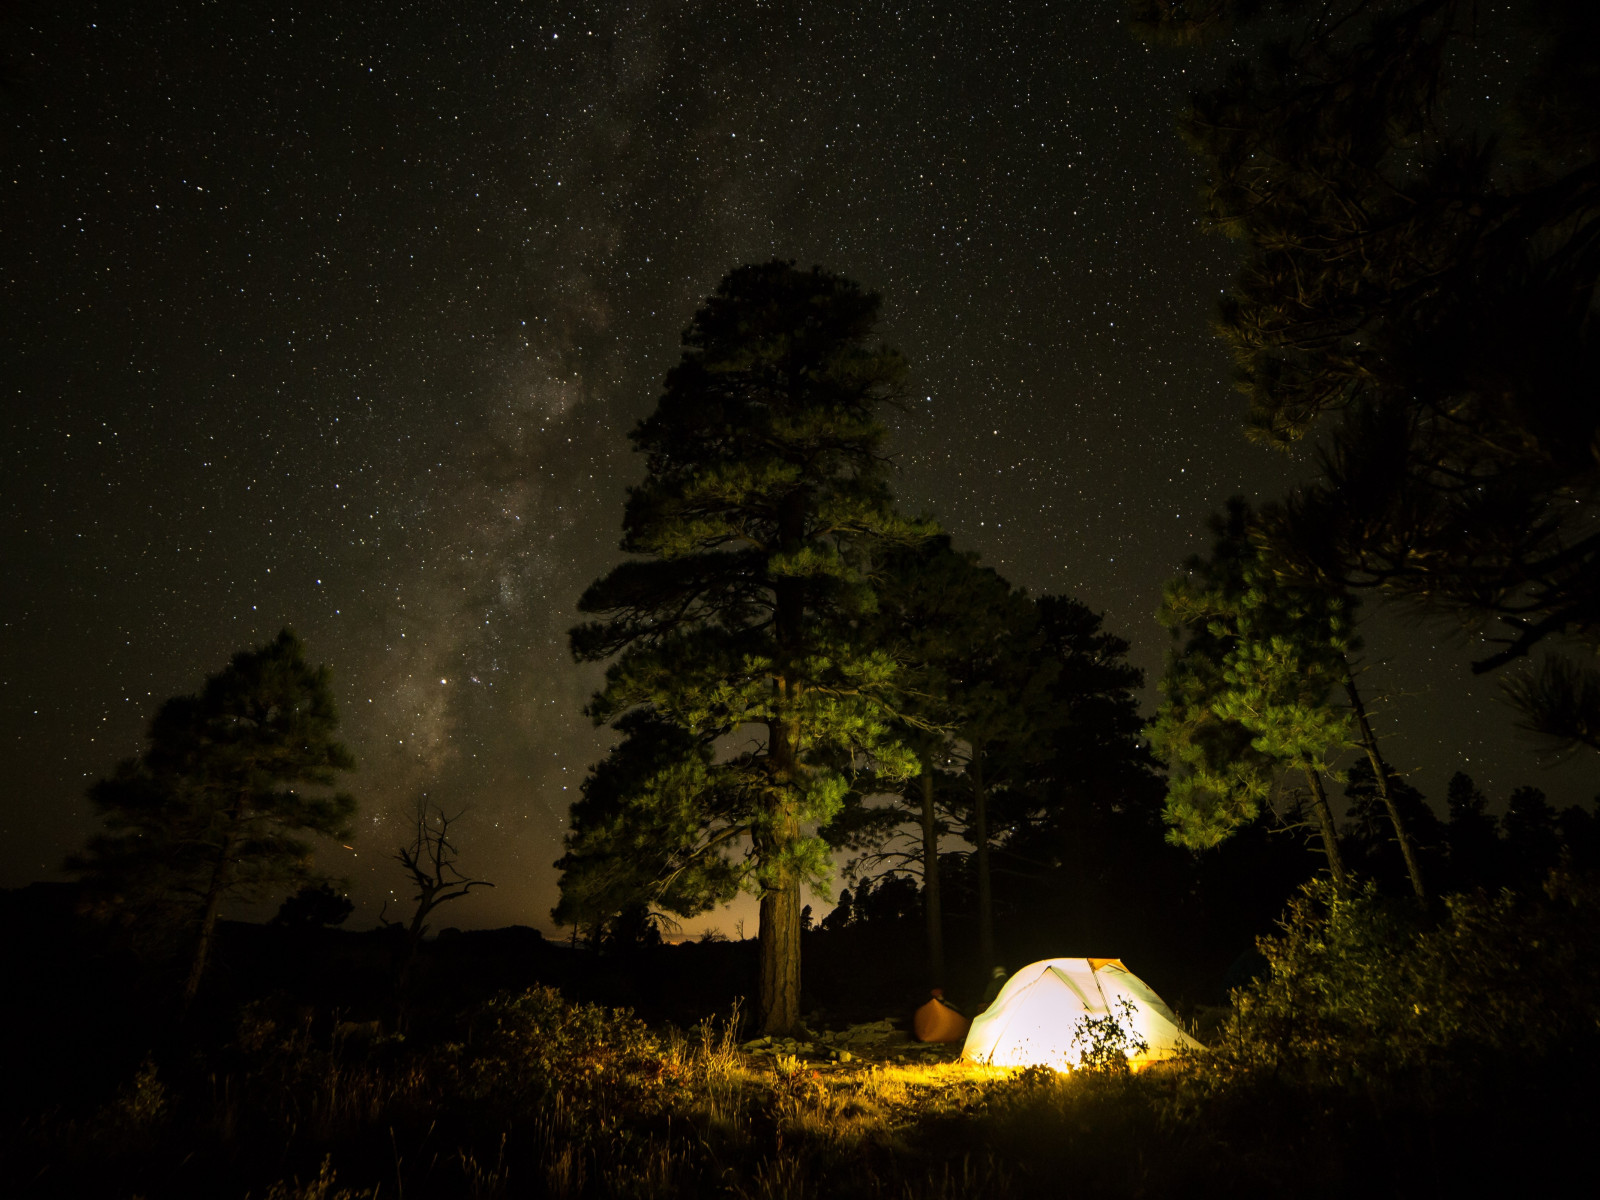 With tent under the night sky wallpaper 1600x1200